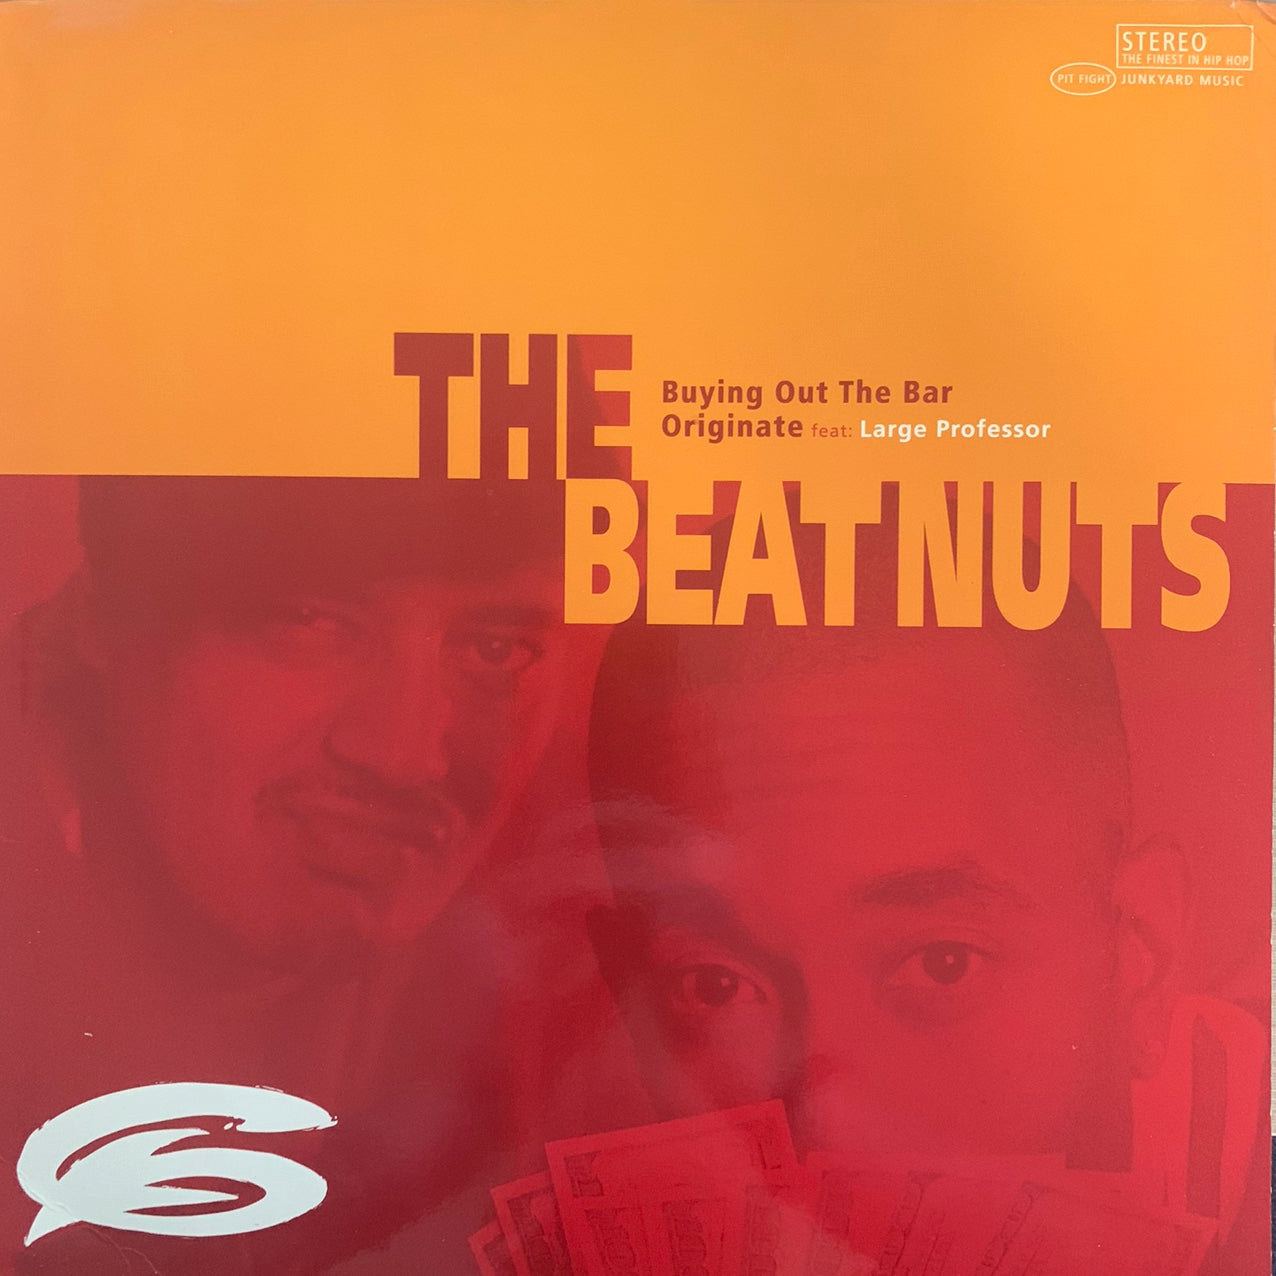 The Beatnuts “Buying Out The Bar” / “Originate” 6 Version 12inch Vinyl